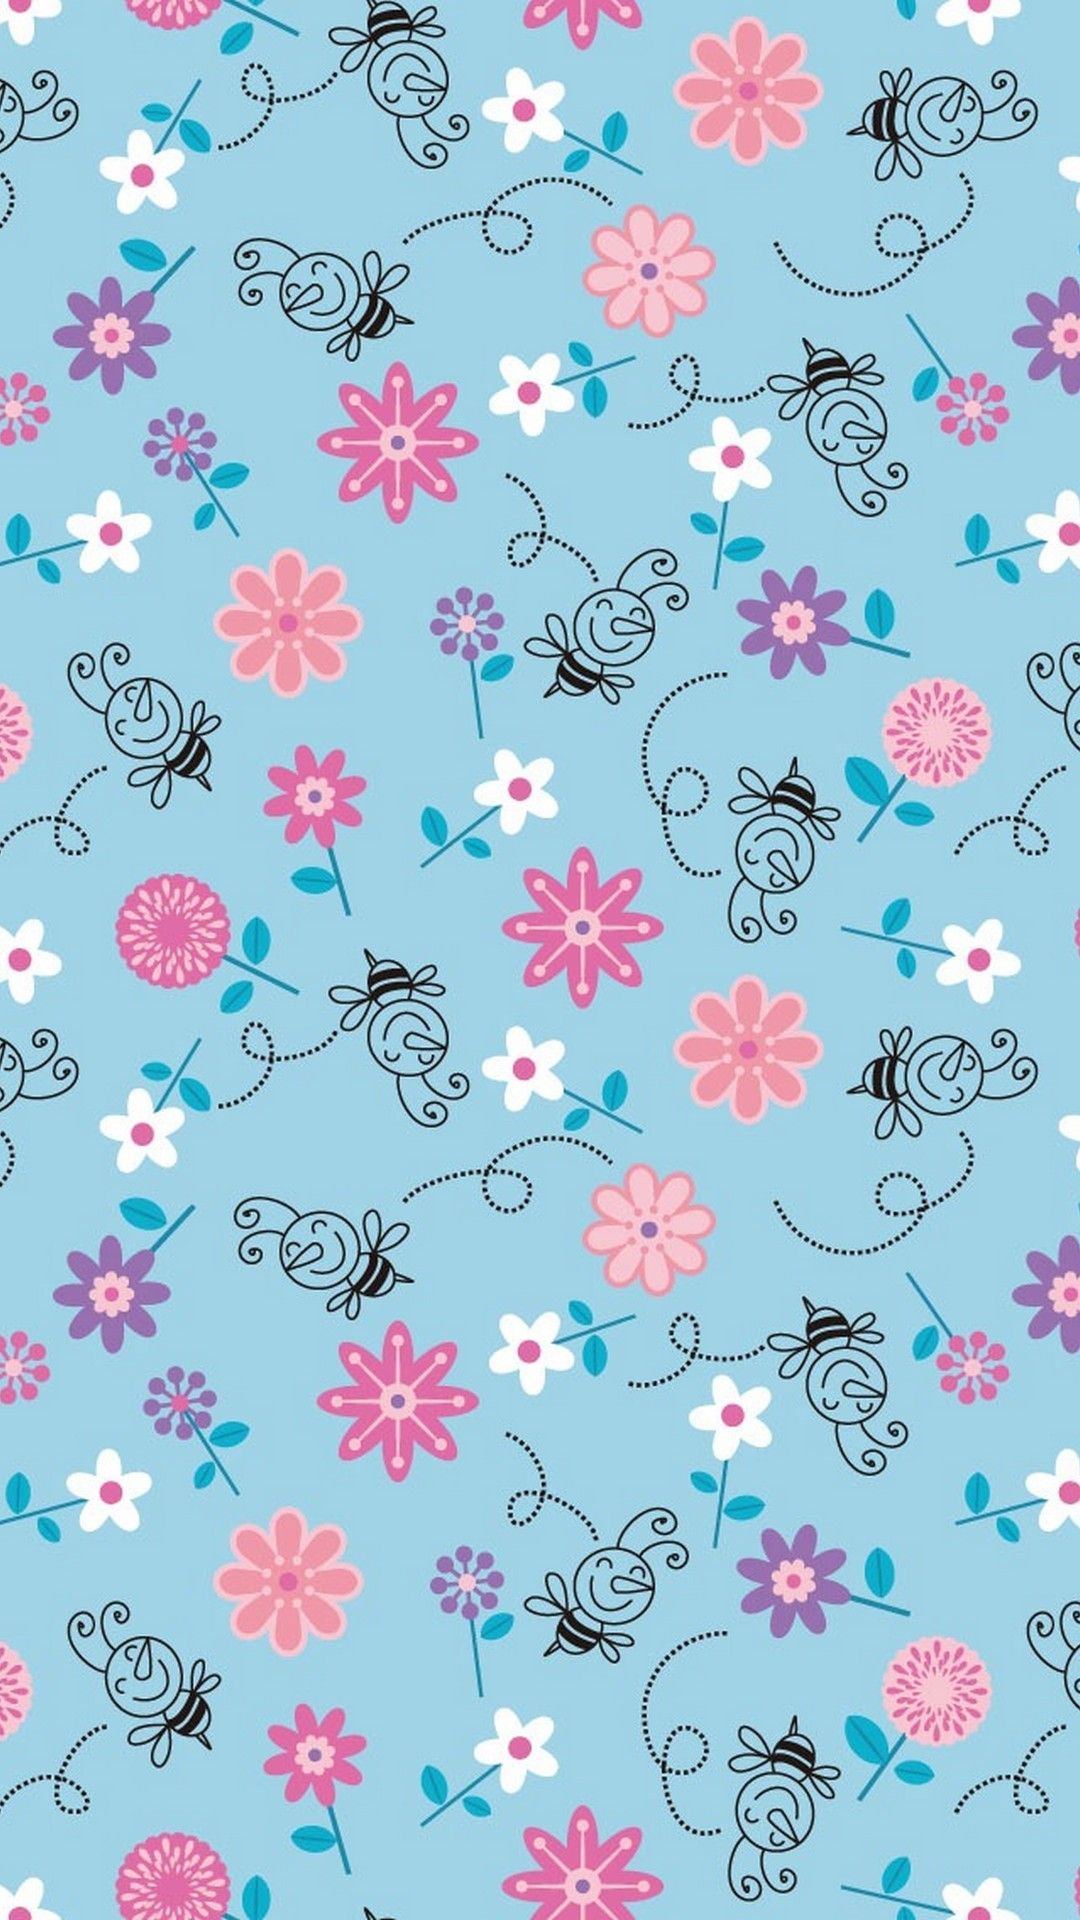 Cute Girly Design Wallpapers on WallpaperDog